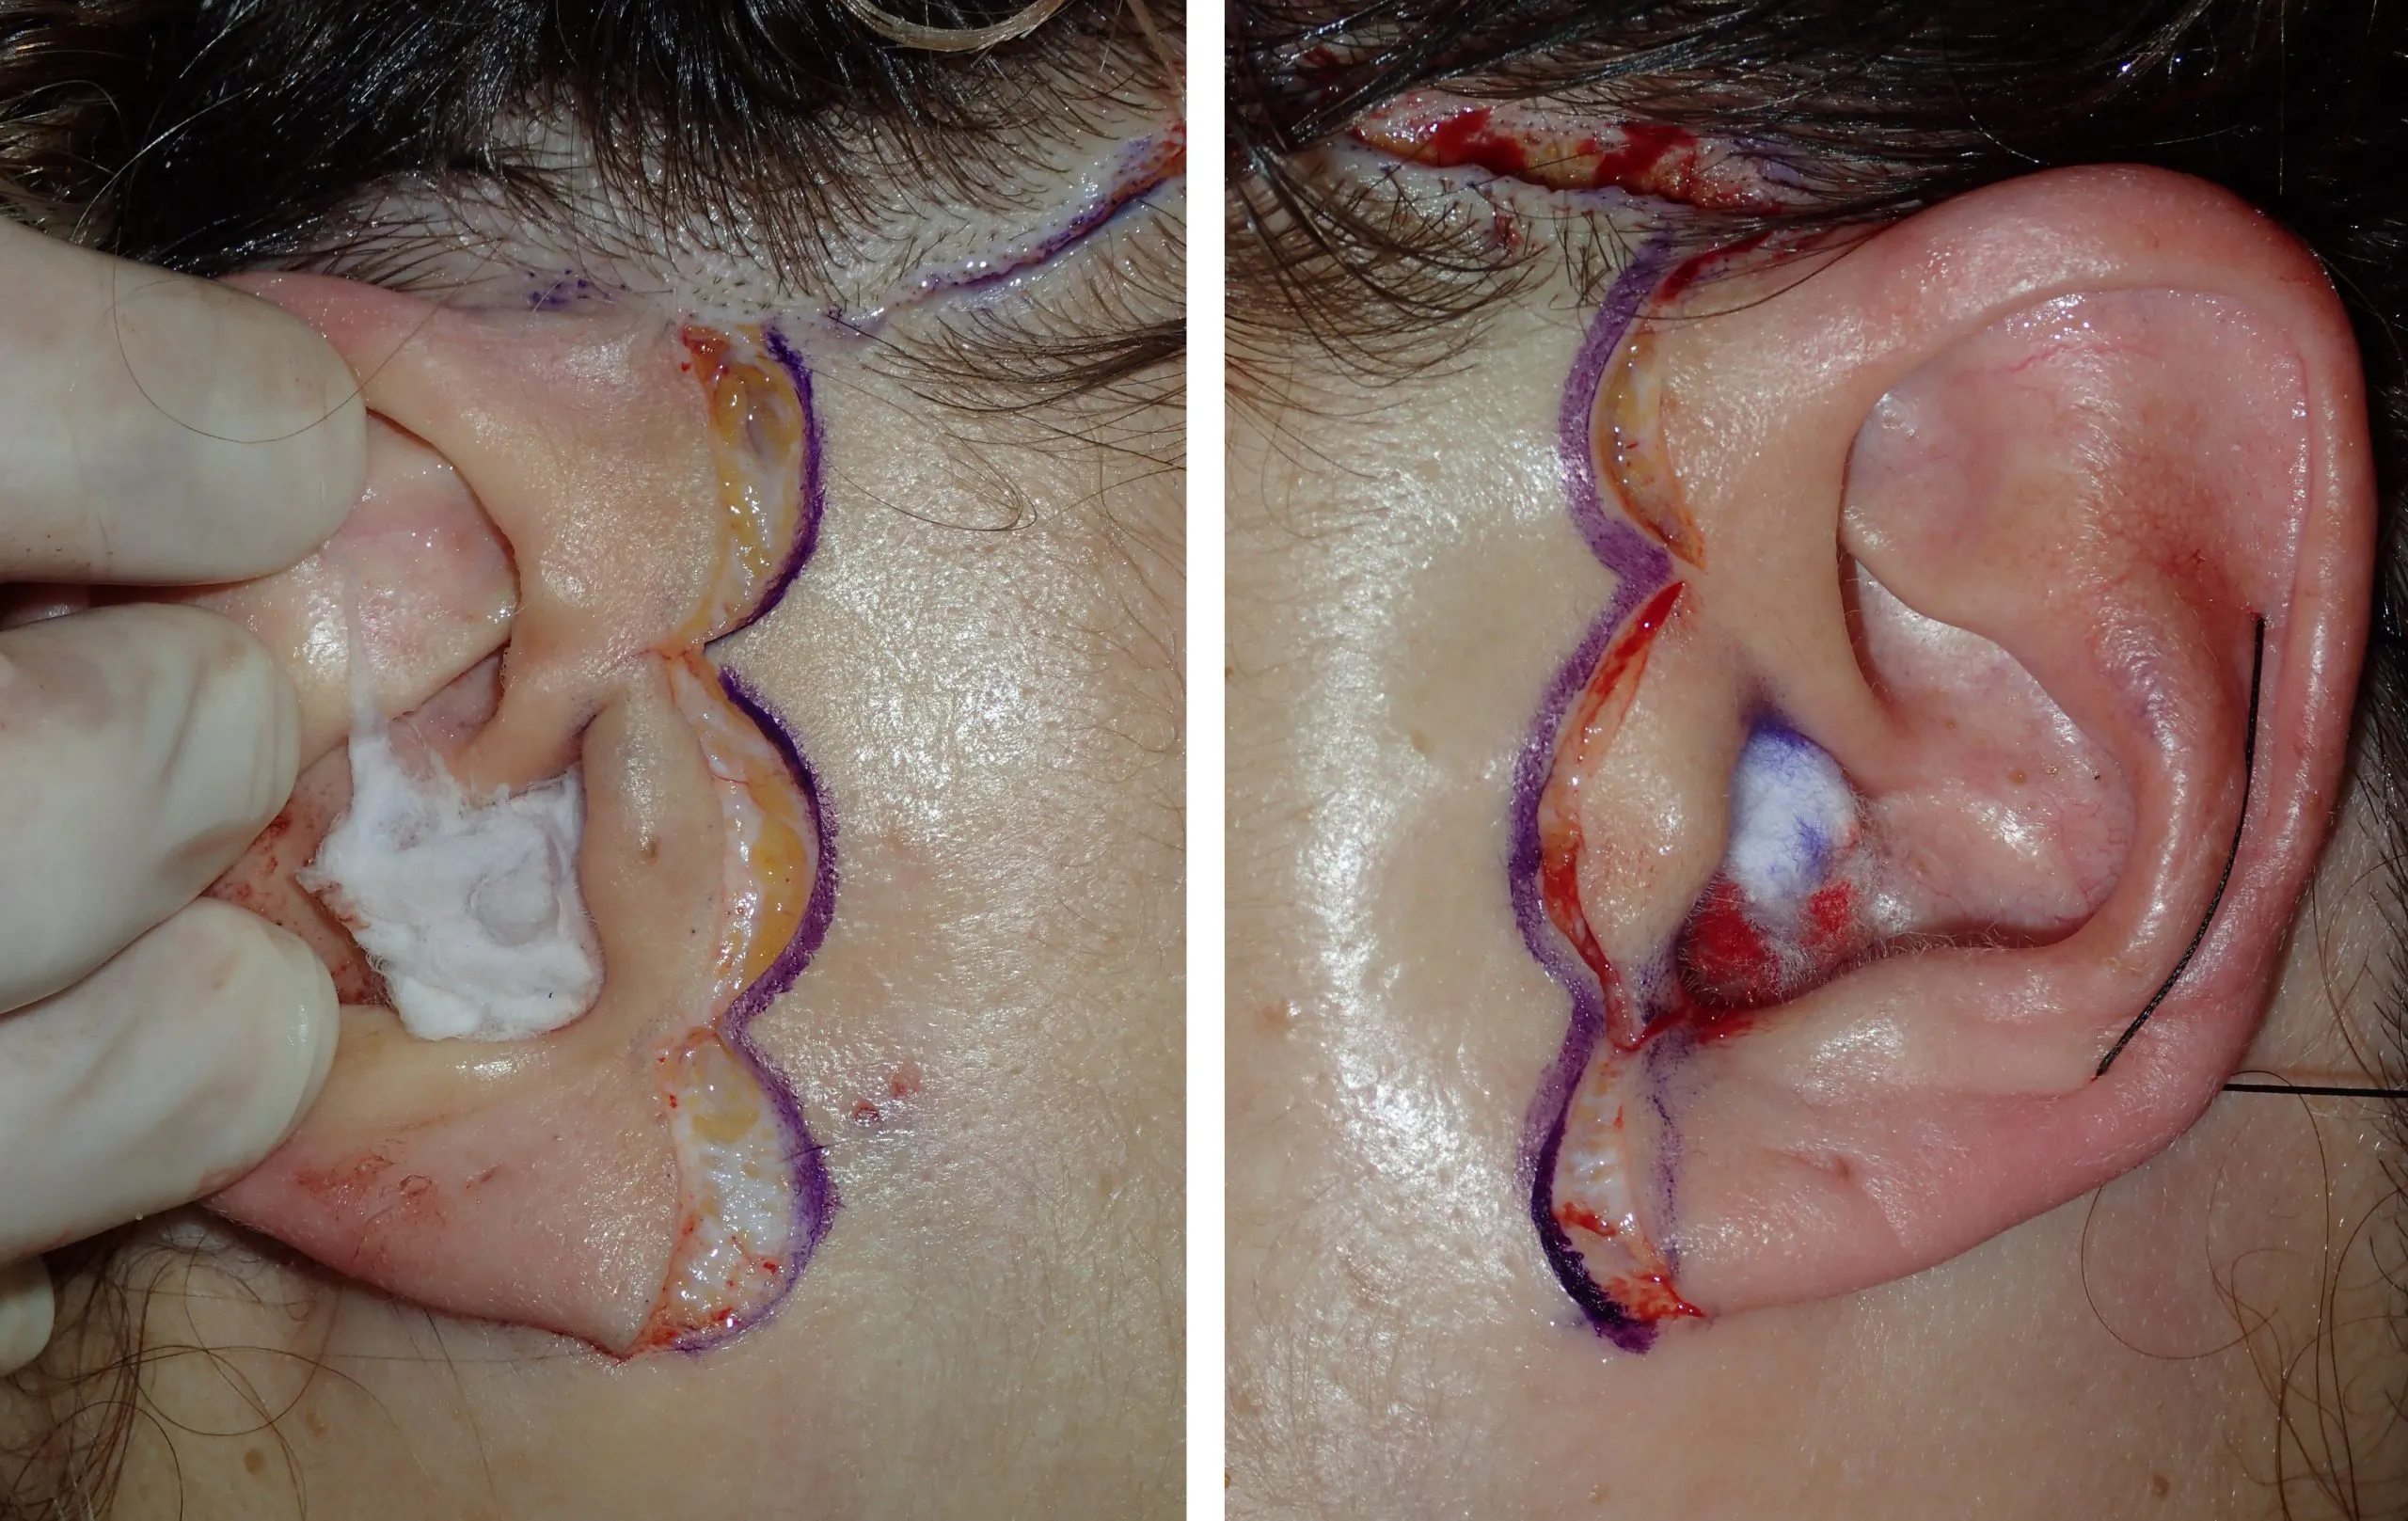 standard facelift incisions in front of and behind the ear